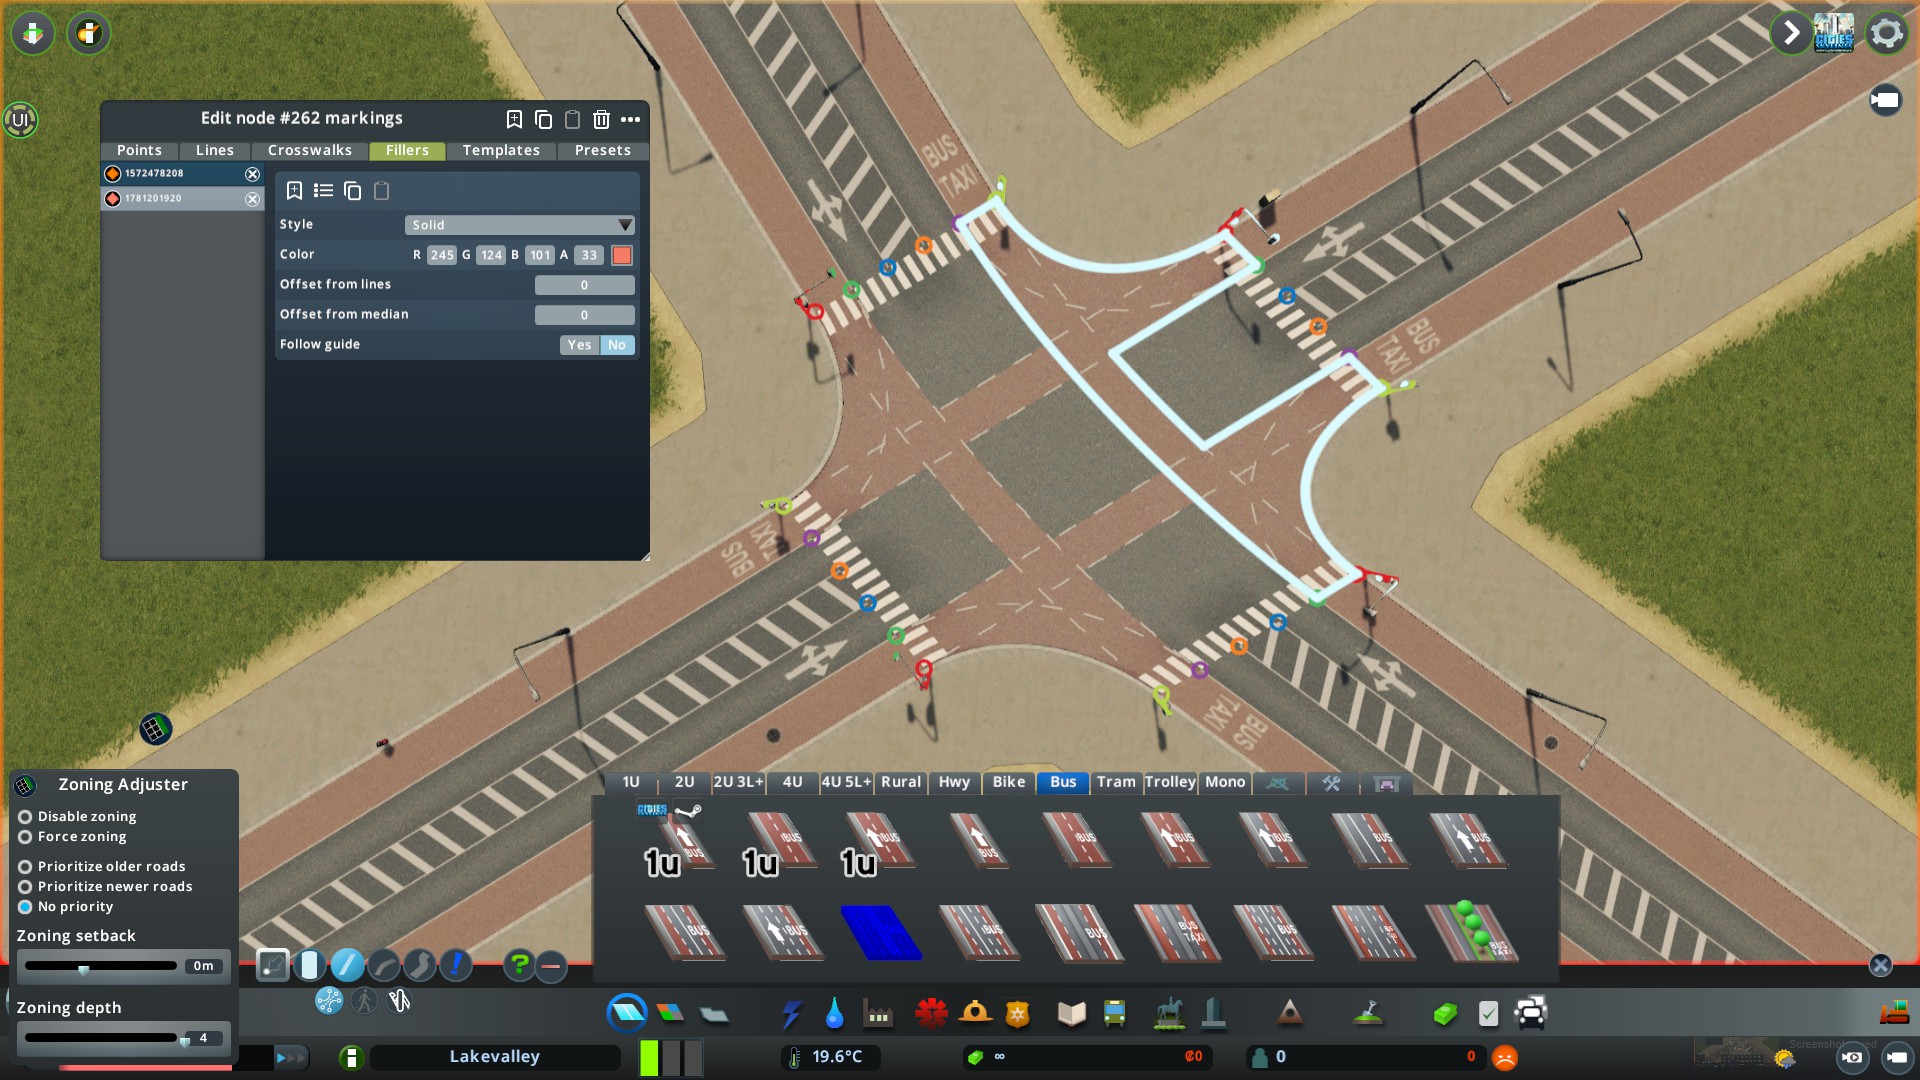 Cities: Skylines - The official guide for IMT with Vanilla + Roads & Lane Filler Colours - How to make them pretty - FBB6406